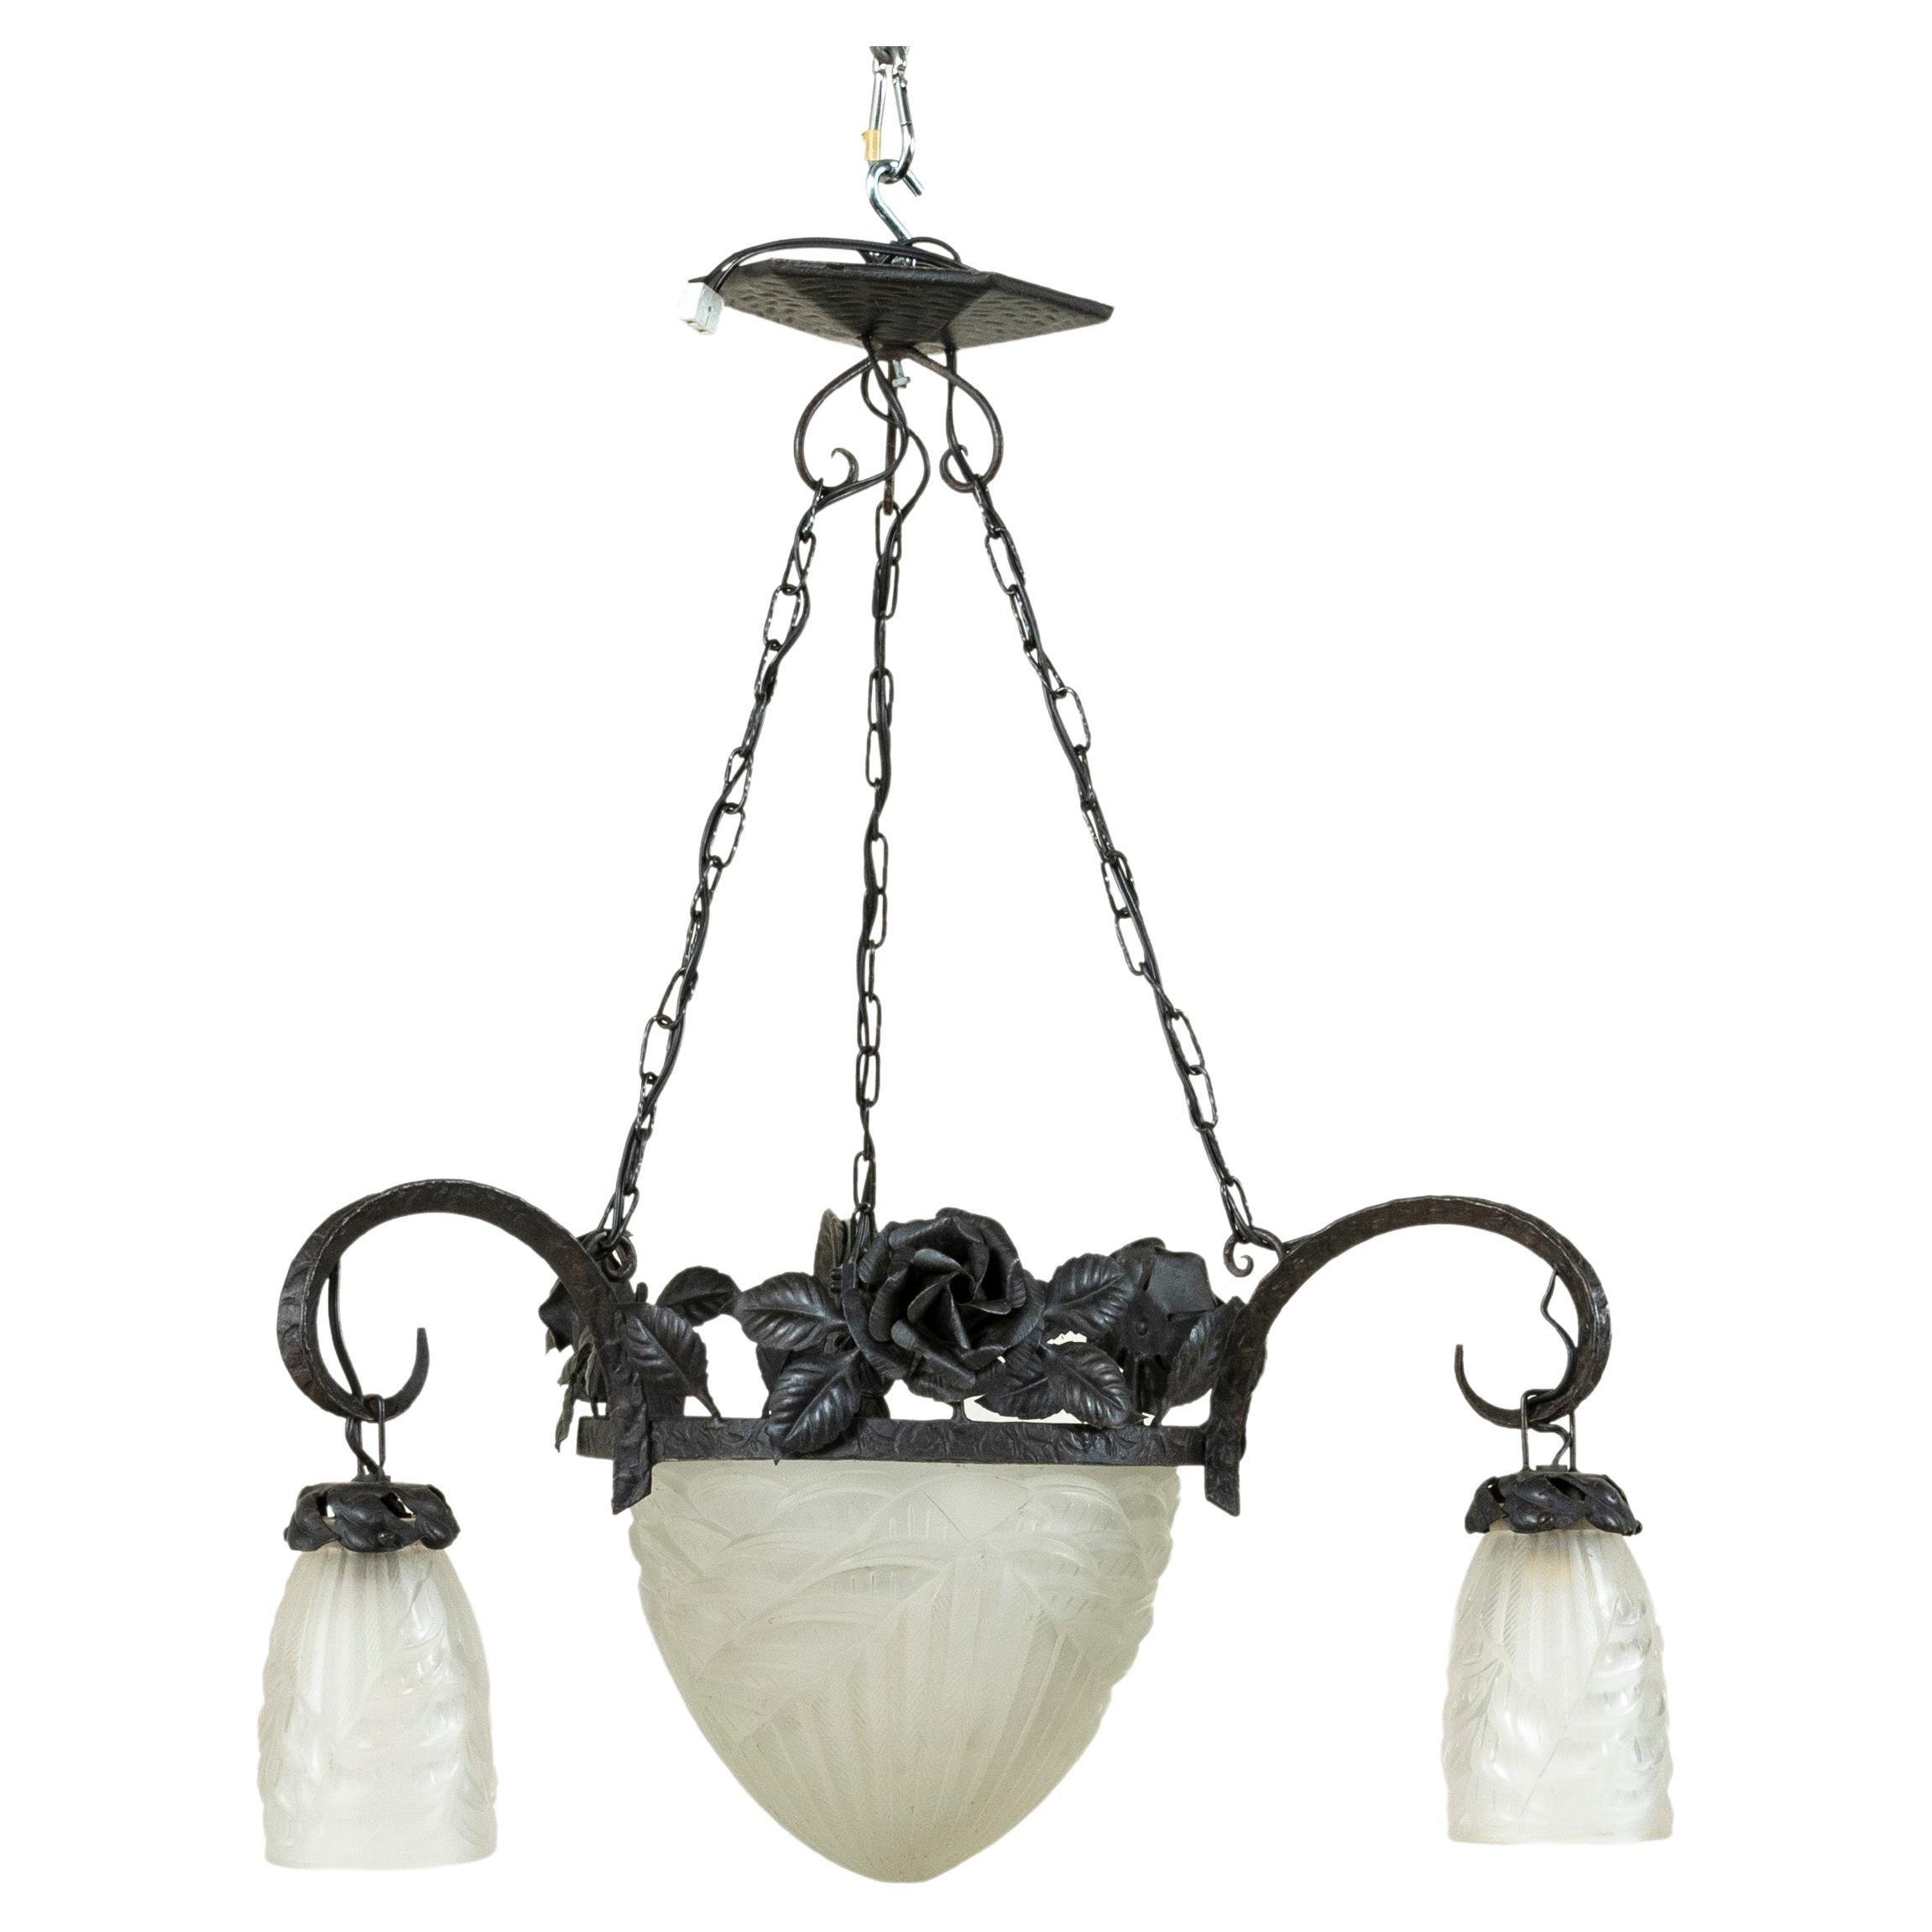 Early 20th Century French Art Deco Period Iron and Glass Chandelier, Four Lights